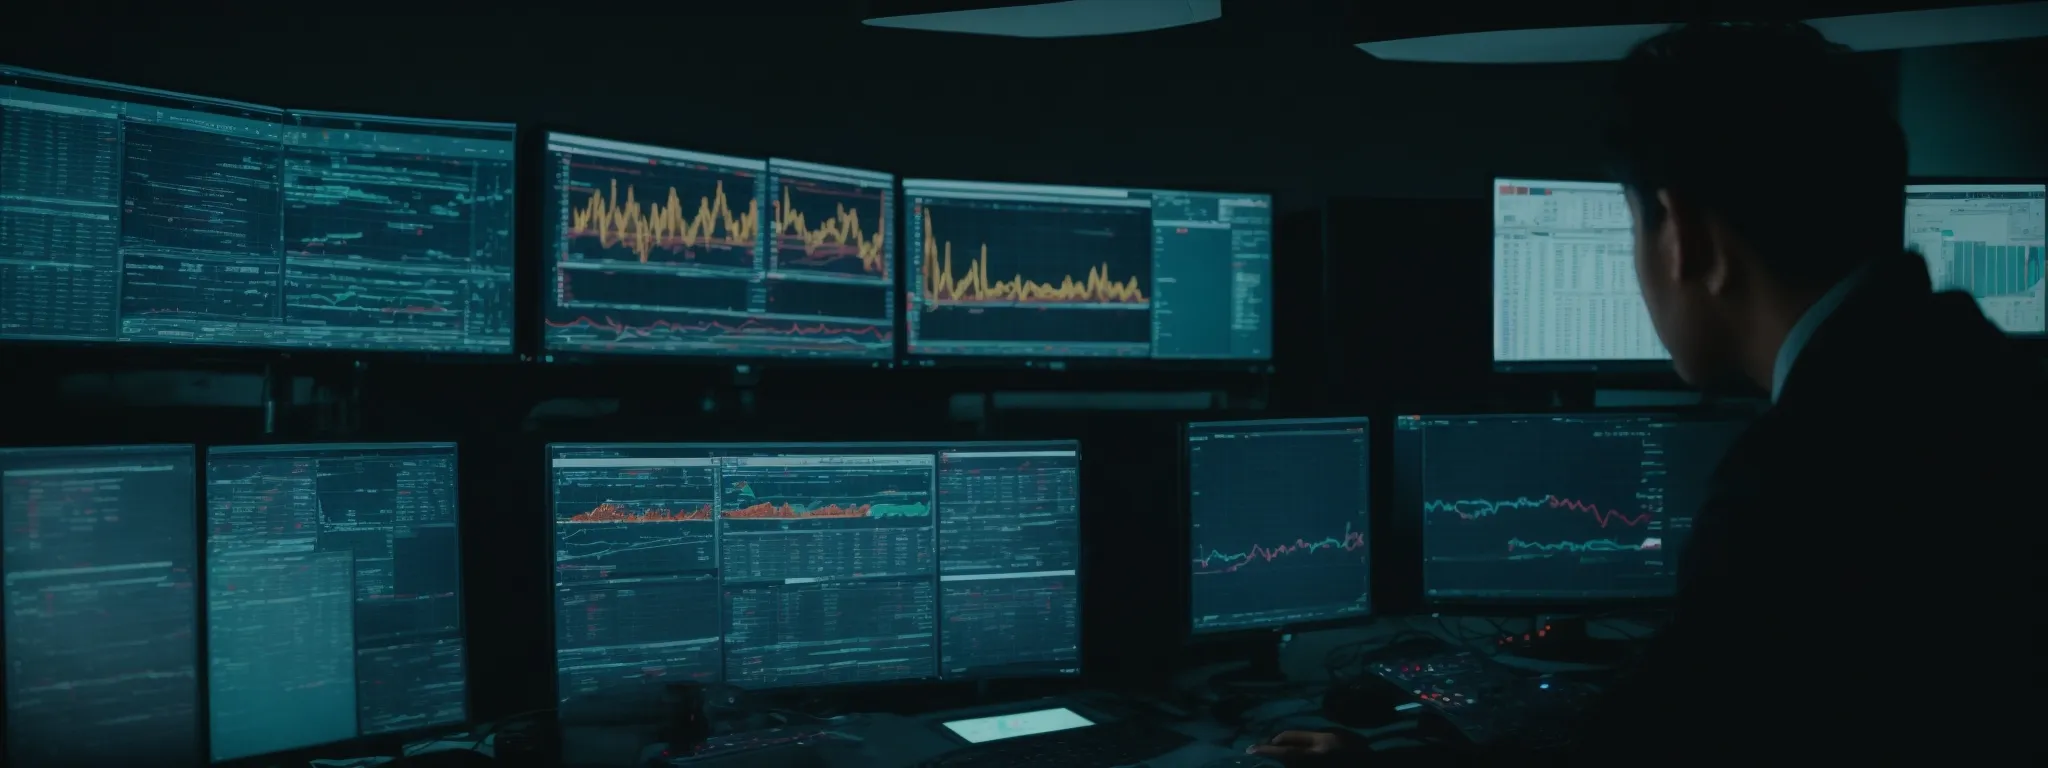 a person analyzing data trends on multiple computer screens in a futuristic control room.